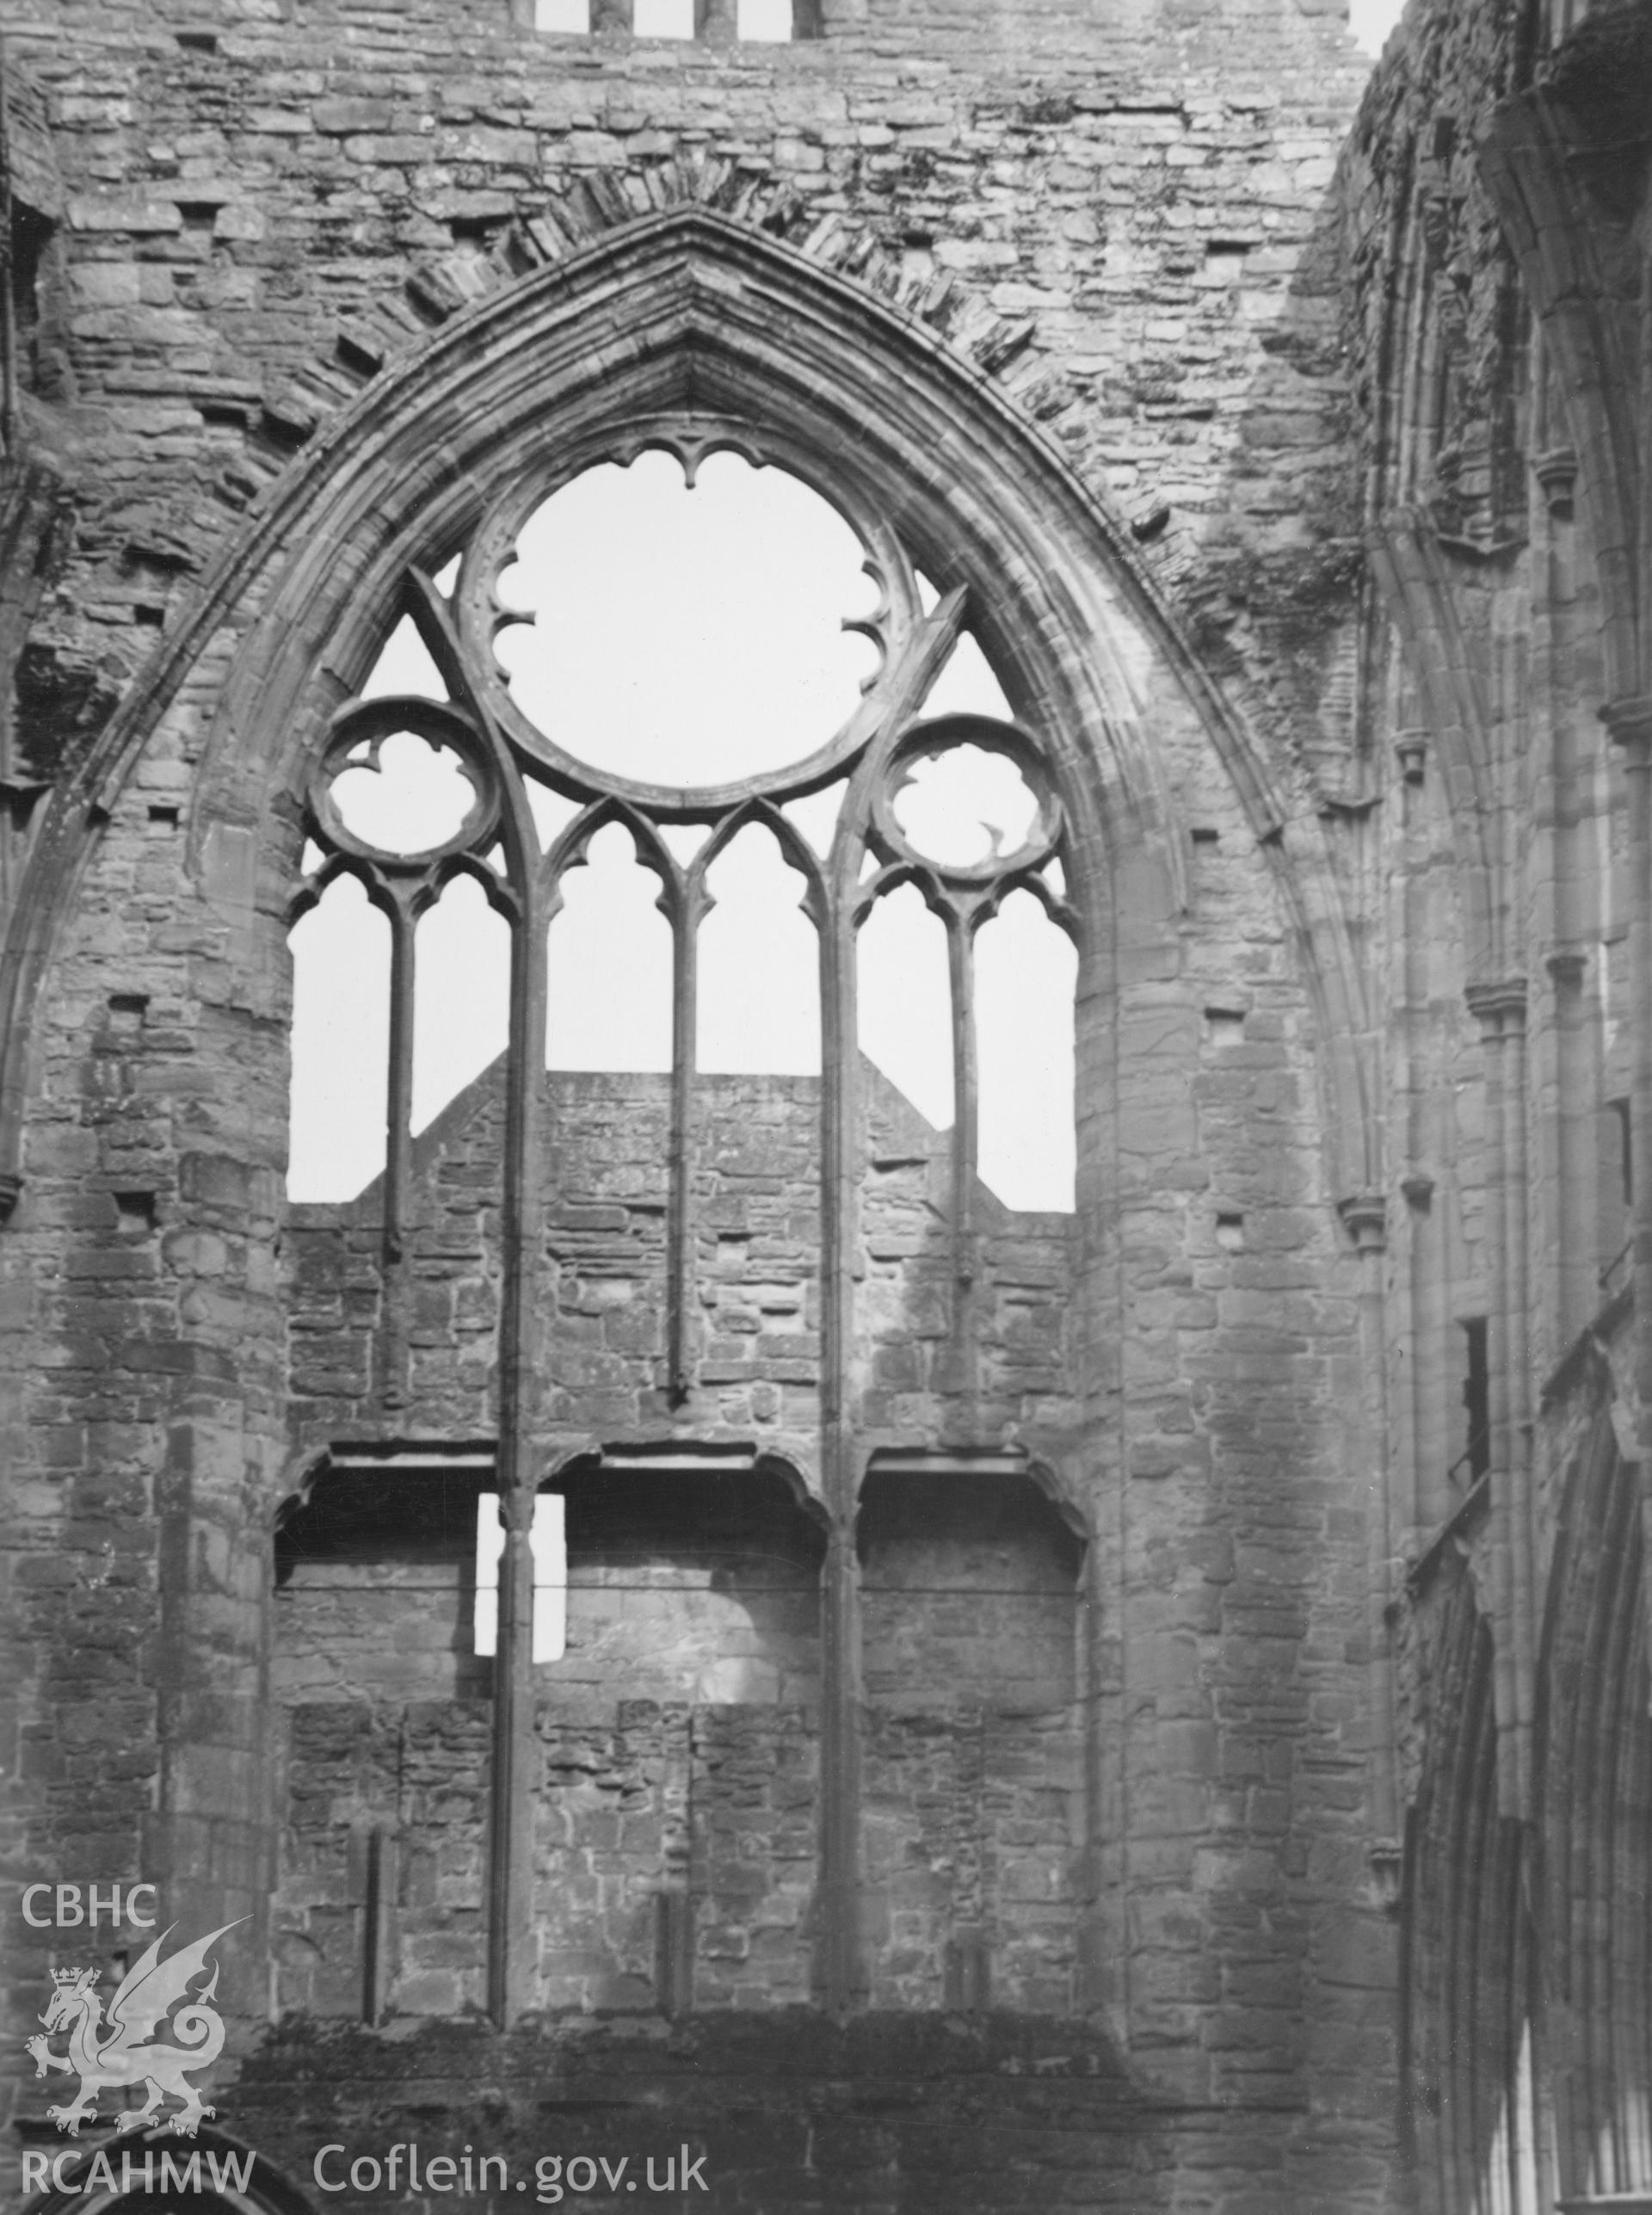 Digital copy of a view of Tintern Abbey taken by Shirley Jones, dated 1943.